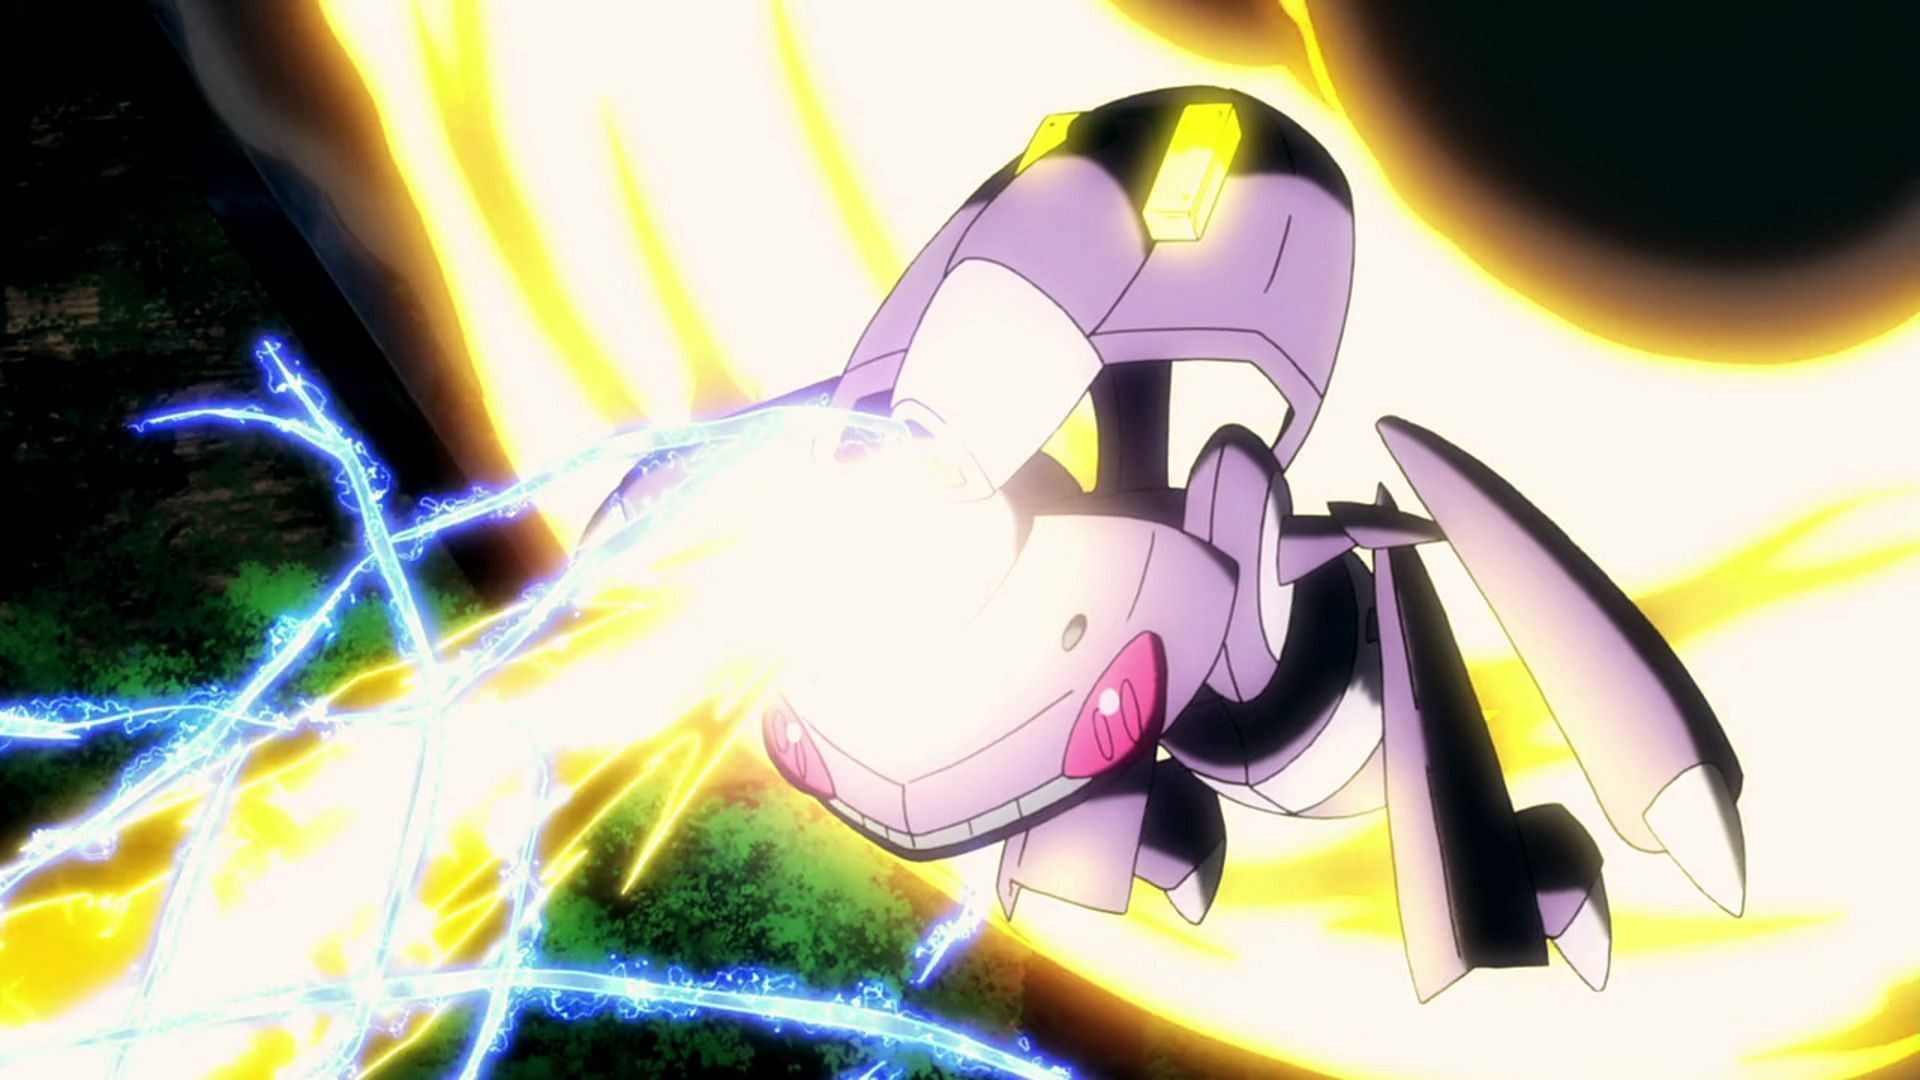 Shock Drive Genesect as it appears in the anime (Image via The Pokemon Company)